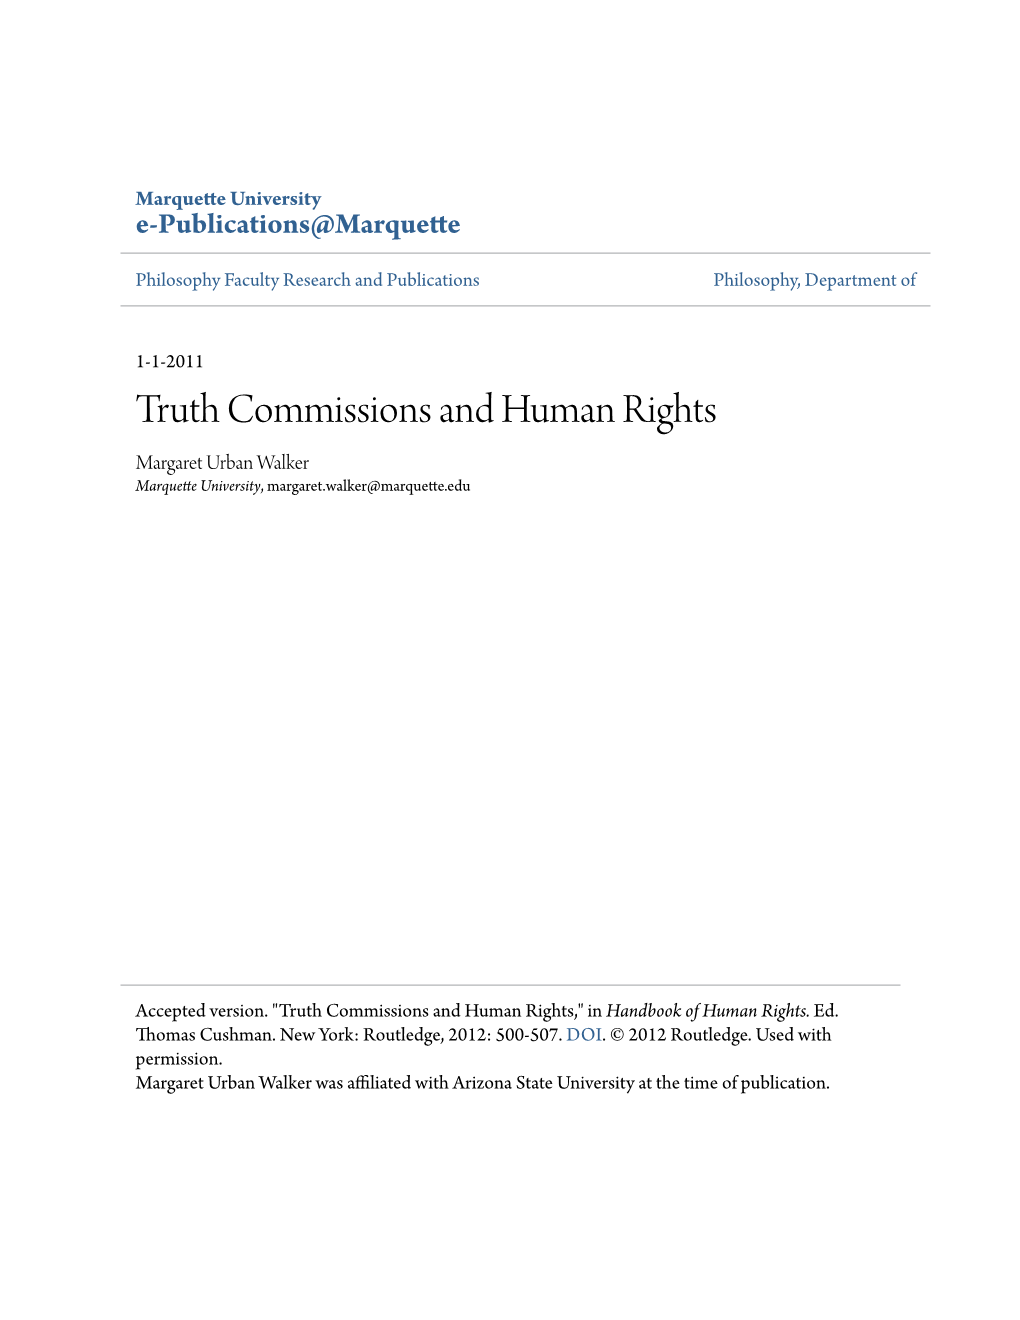 Truth Commissions and Human Rights Margaret Urban Walker Marquette University, Margaret.Walker@Marquette.Edu